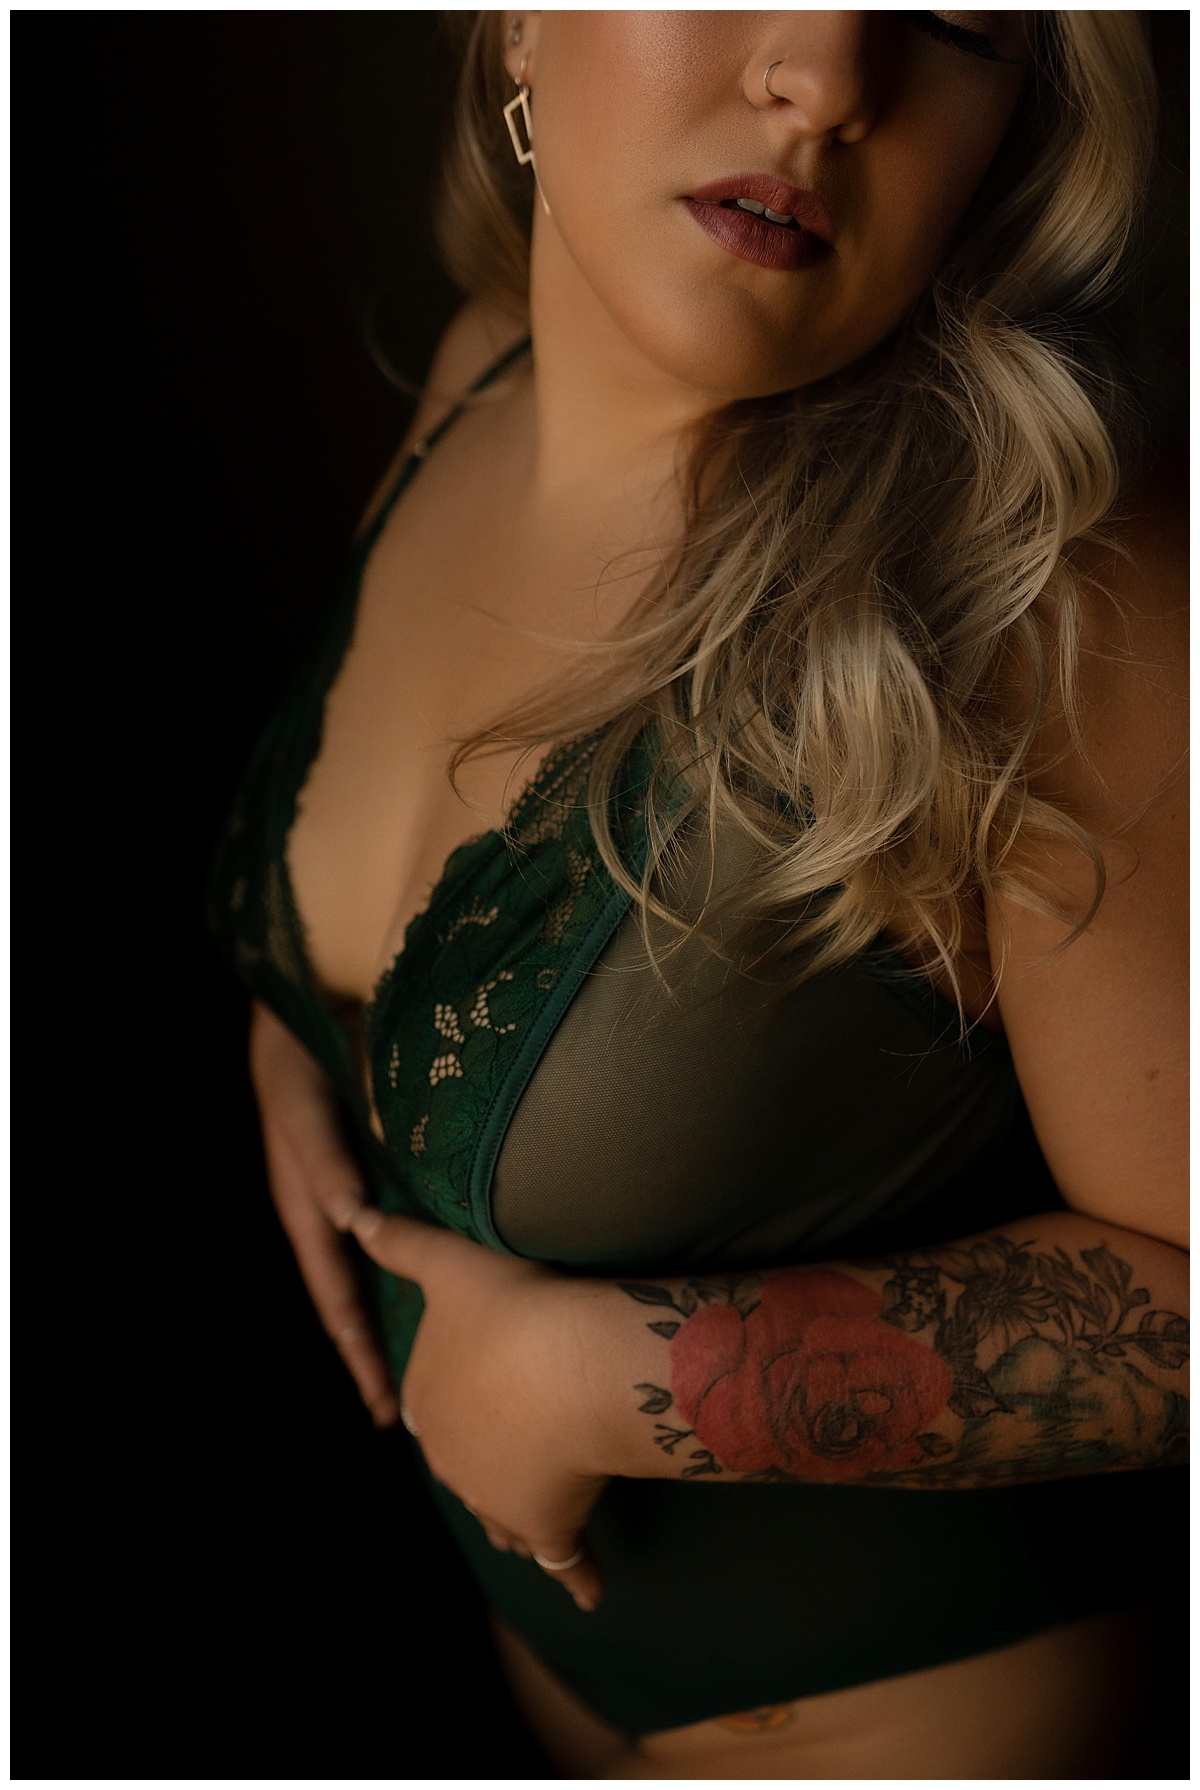 Lady covers body with hands wearing green lingerie for Emma Christine Photography